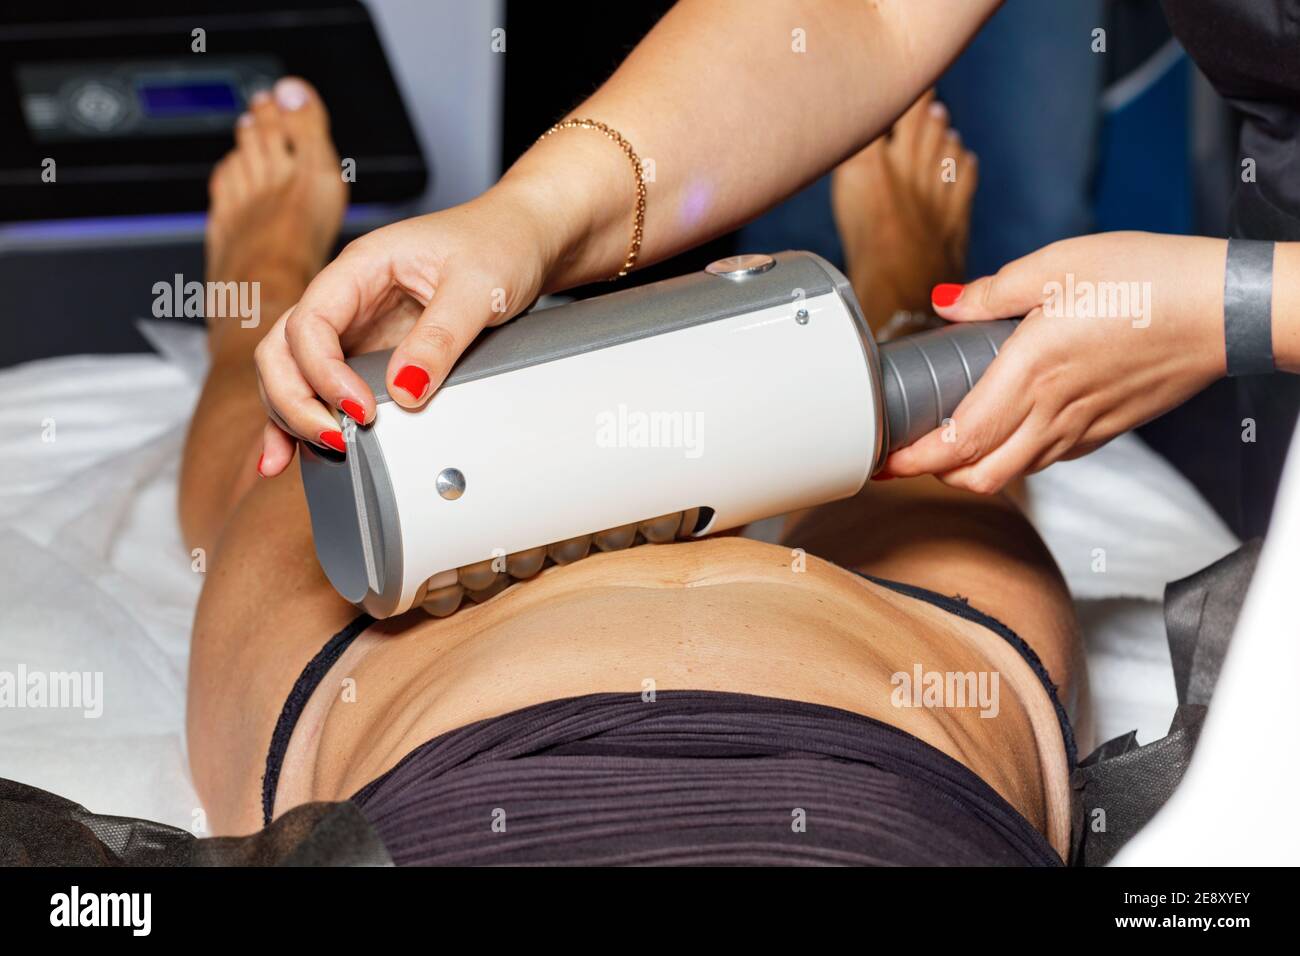 A professional cosmetologist performs an electromagnetic muscle massage on a high-intensity trainer. Stock Photo